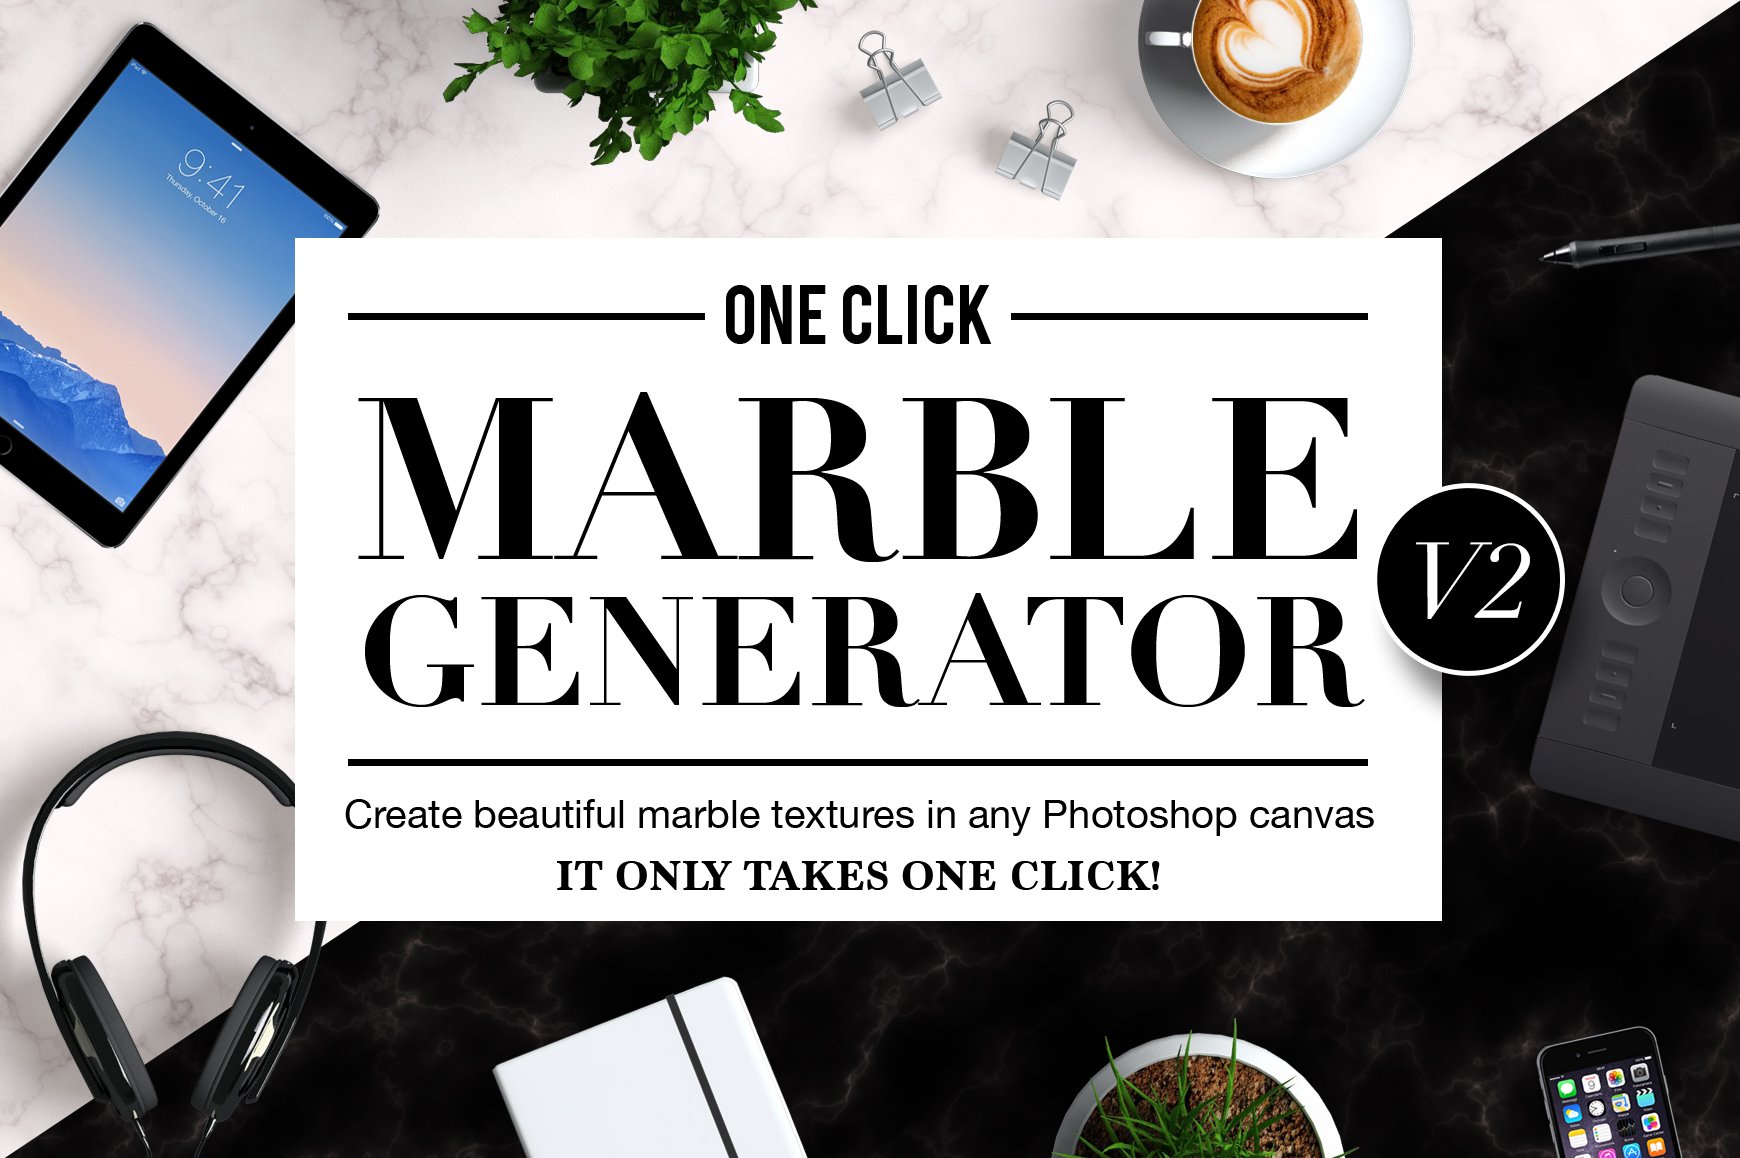 OneClick Marble Texture Generator V2cover image.